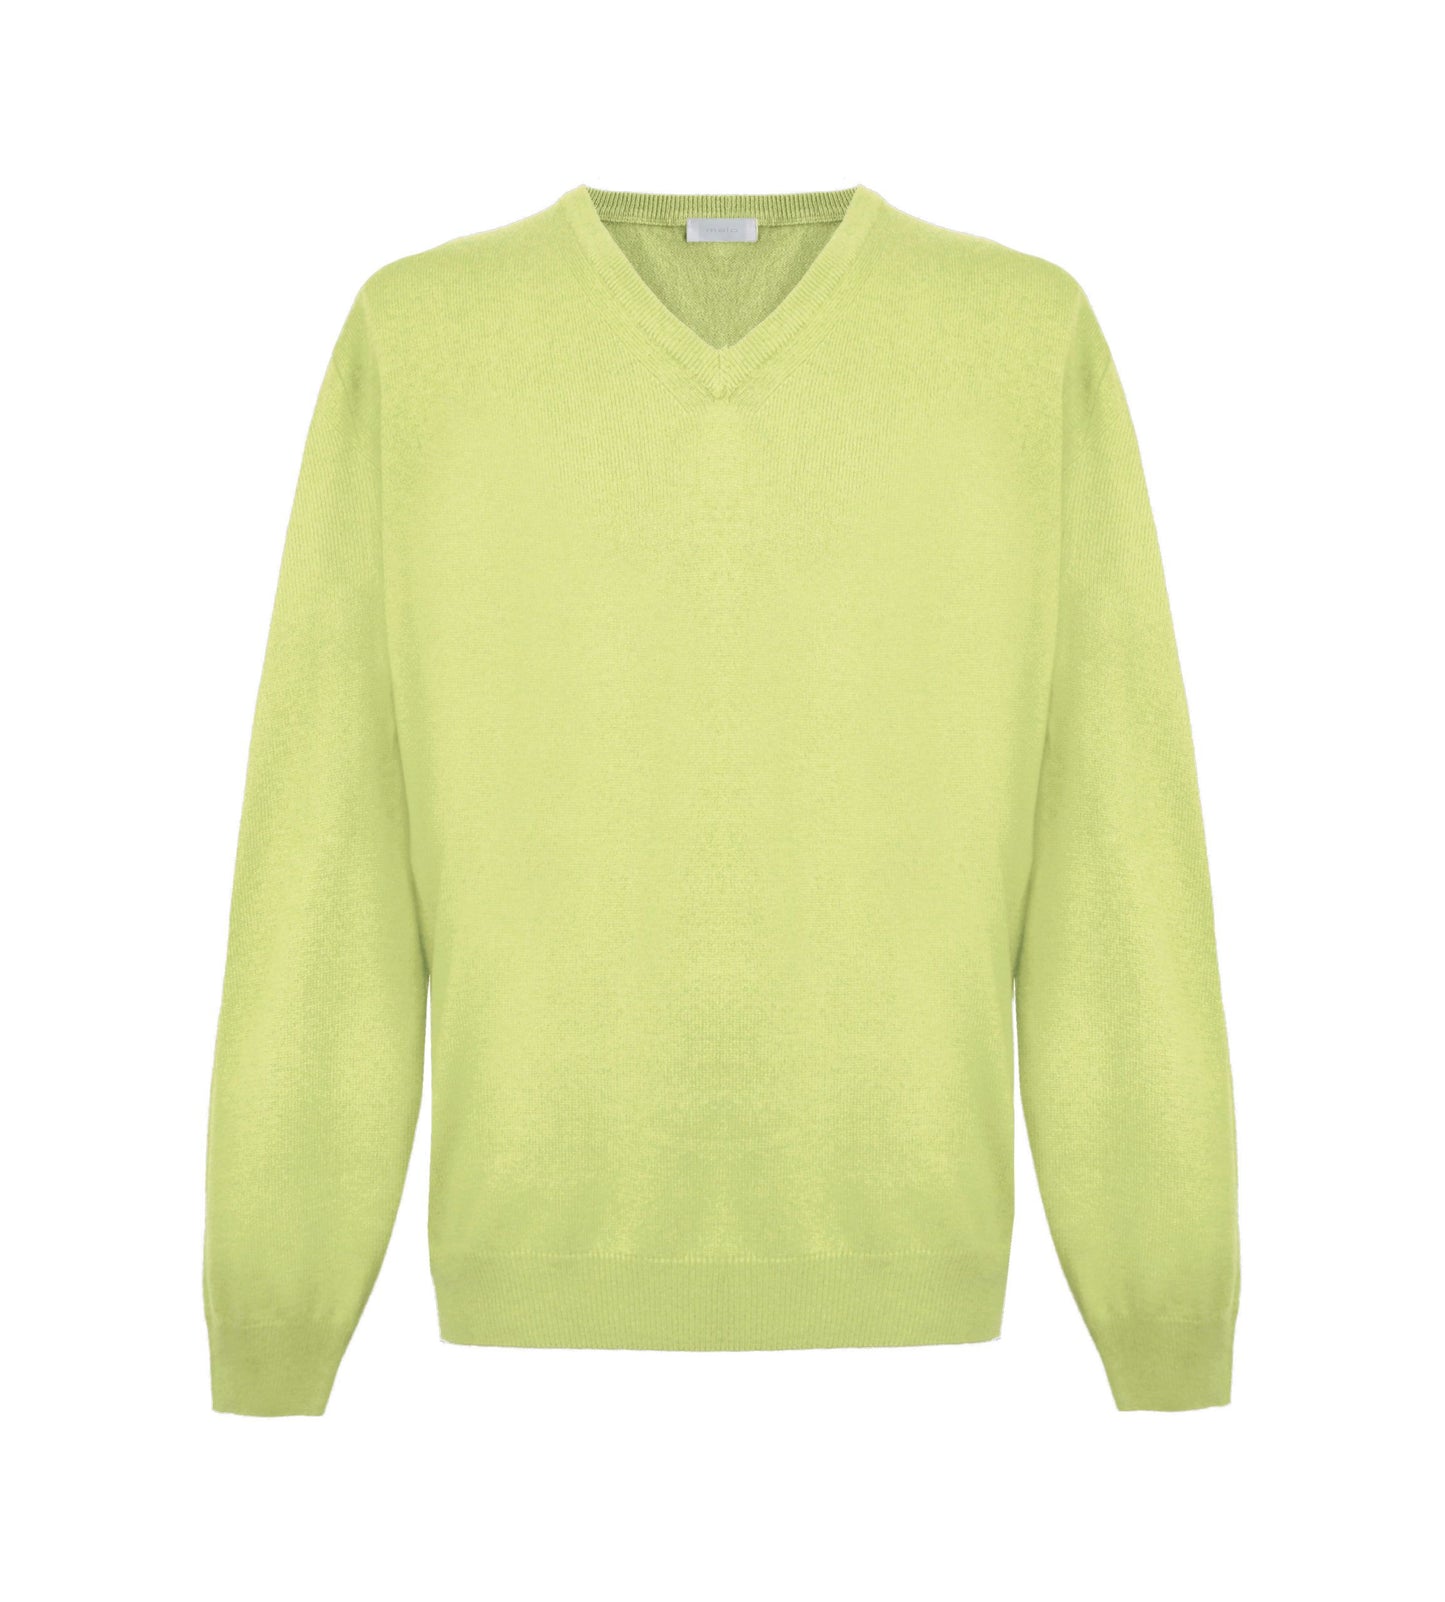 Elegant V-Neck Cashmere Sweater in Sunny Yellow